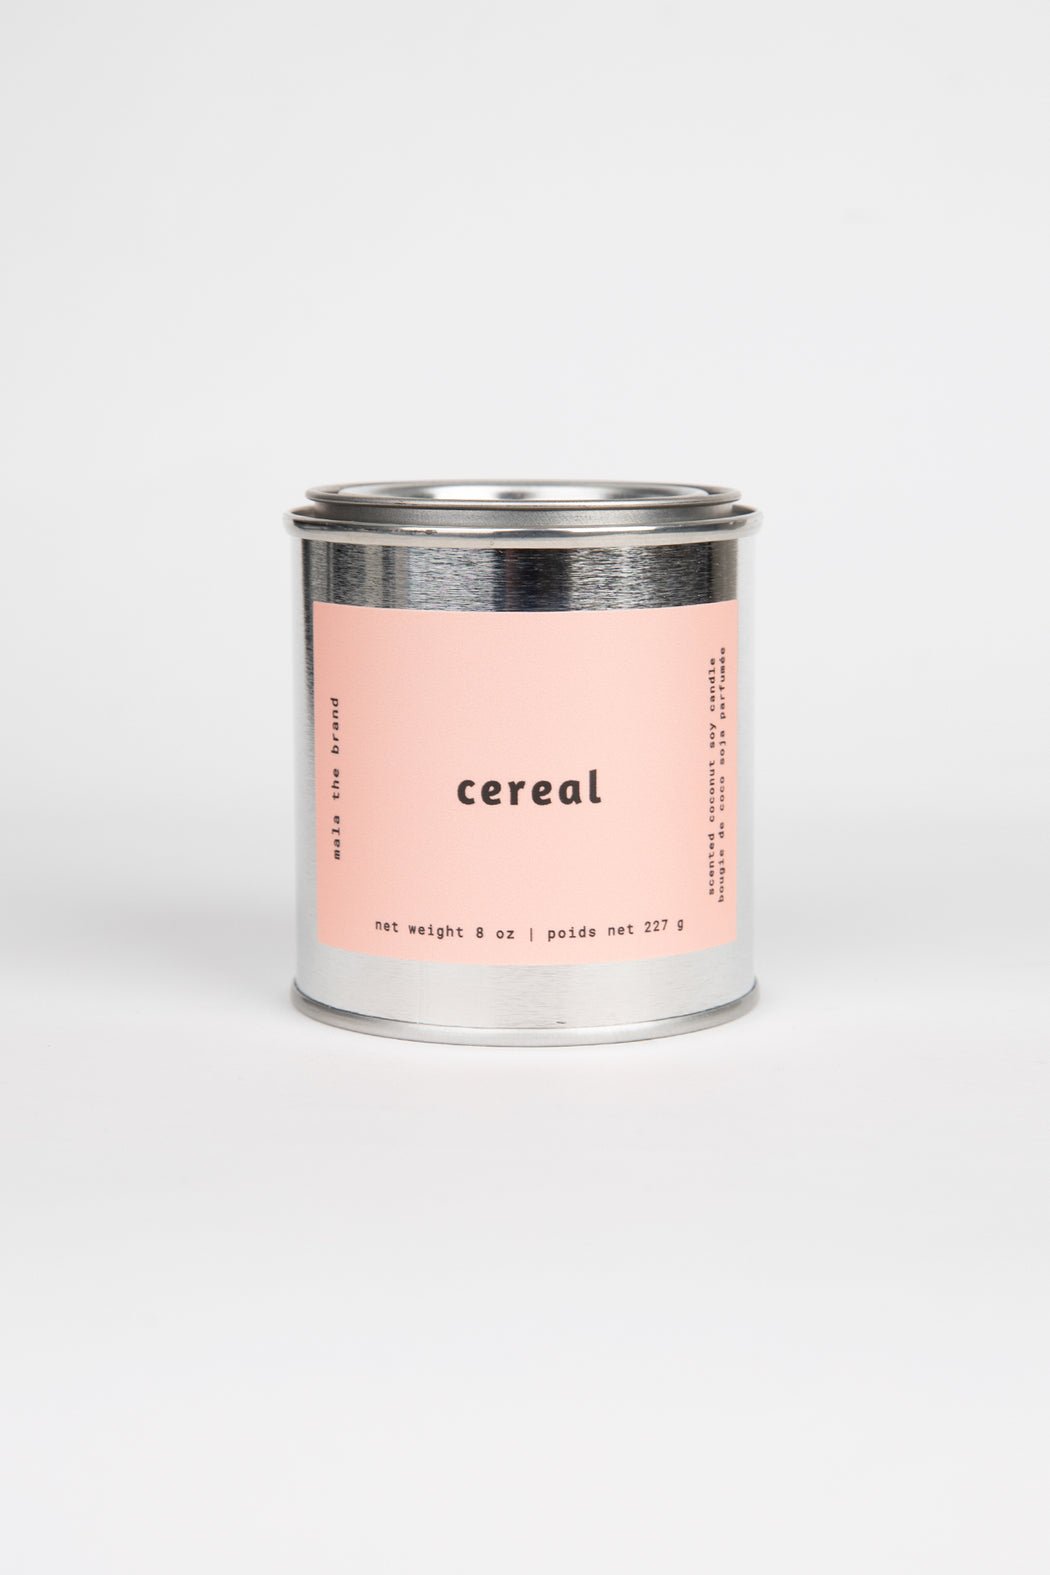 Mala-the-Brand-Candle-Cereal